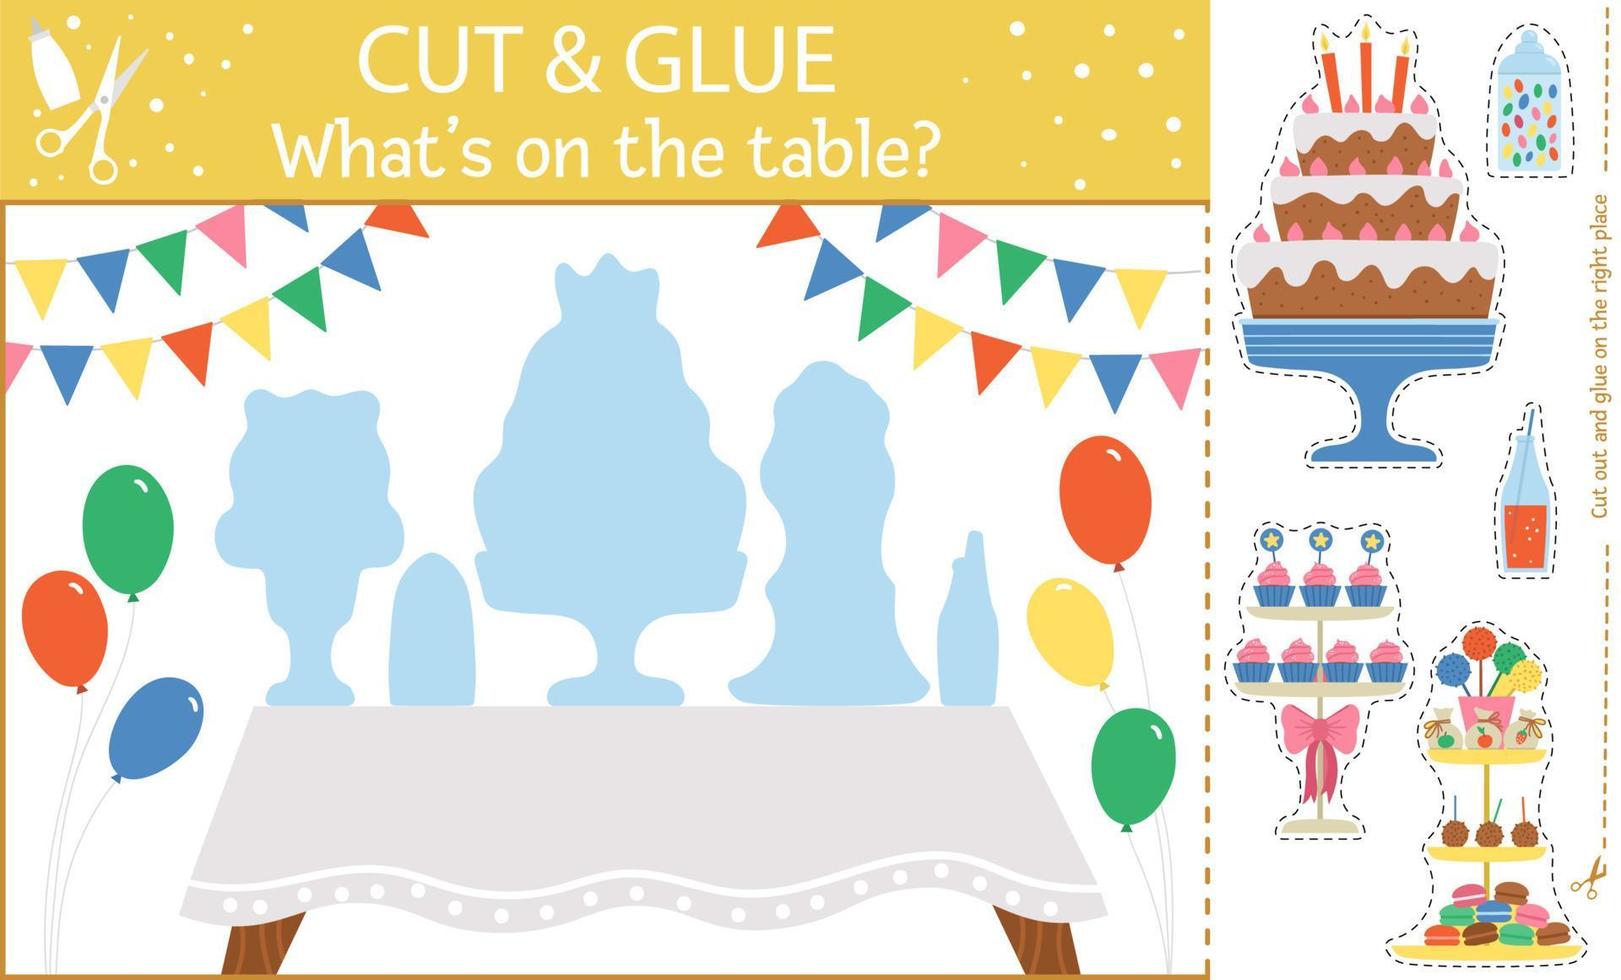 Vector Birthday party cut and glue activity. Holiday educational crafting game with cute cake, sweets, desserts. Fun activity for kids. Candy bar illustration. What is on the table